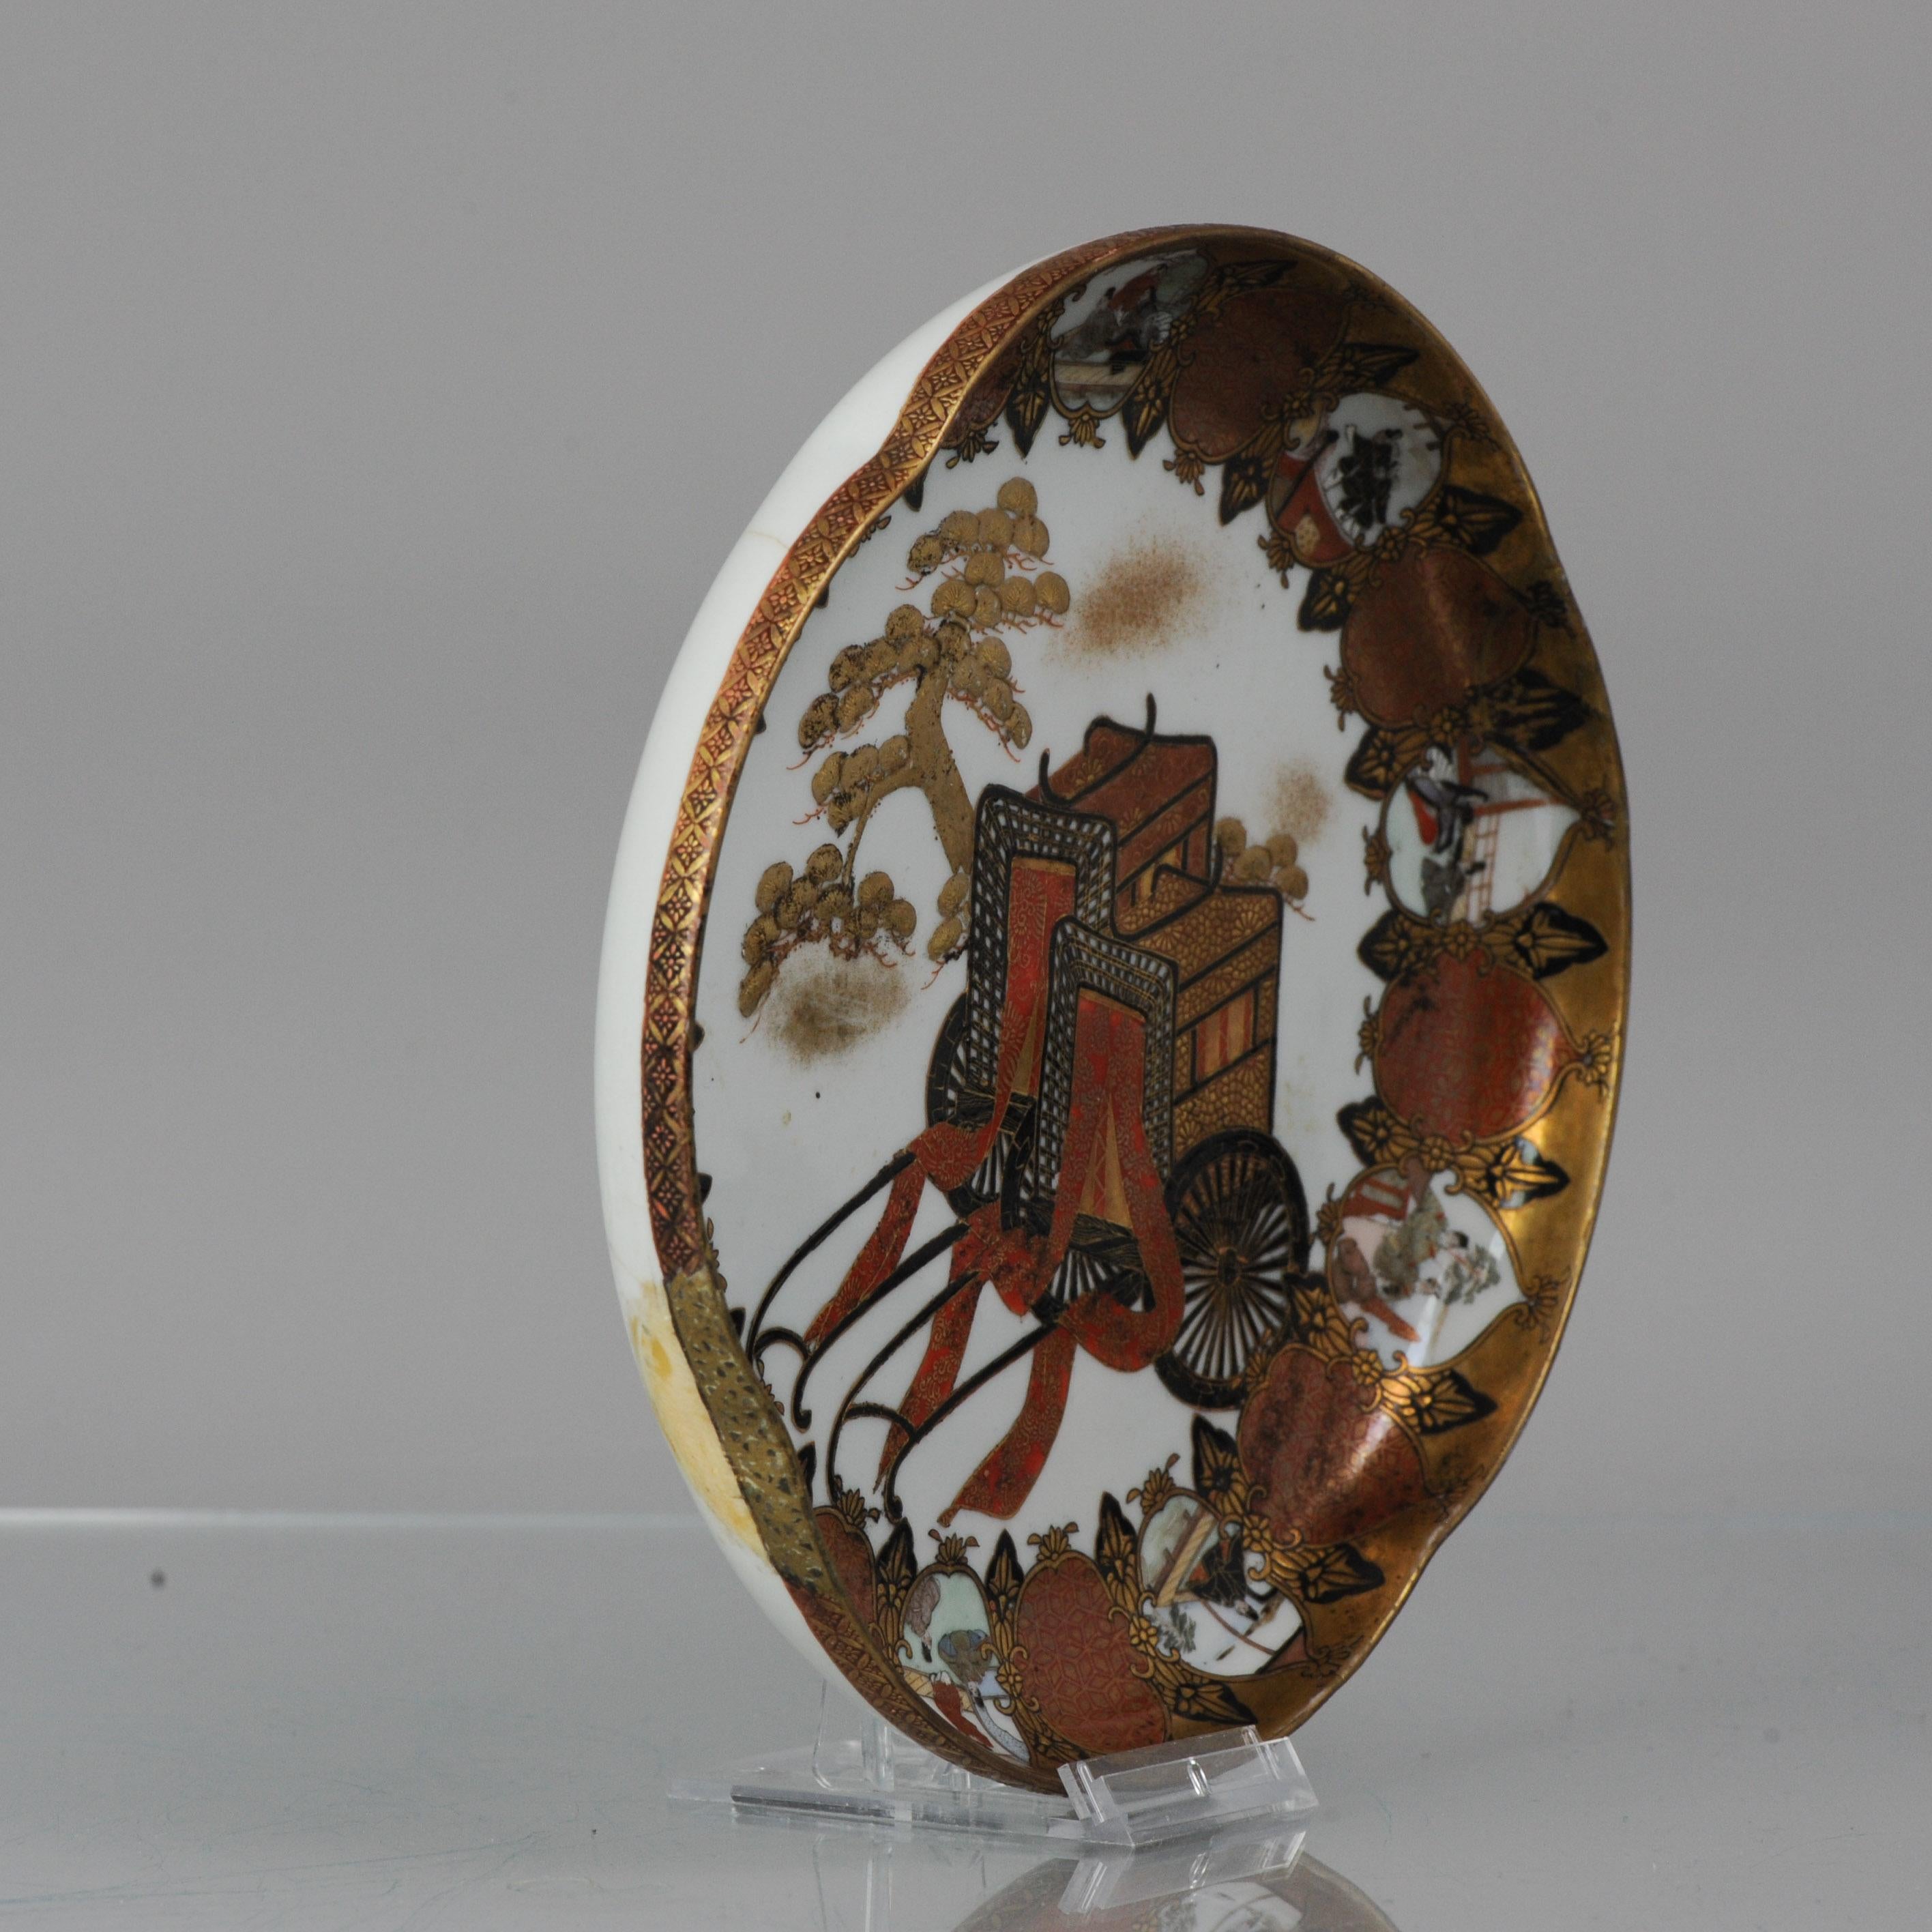 Very lovely piece and detailed piece with a central scene of two carriers and the cavetto with compartments of different scenes with figures.

With a mark at the base.

Additional information:
Material: Porcelain & Pottery
Type: Plates
Region of